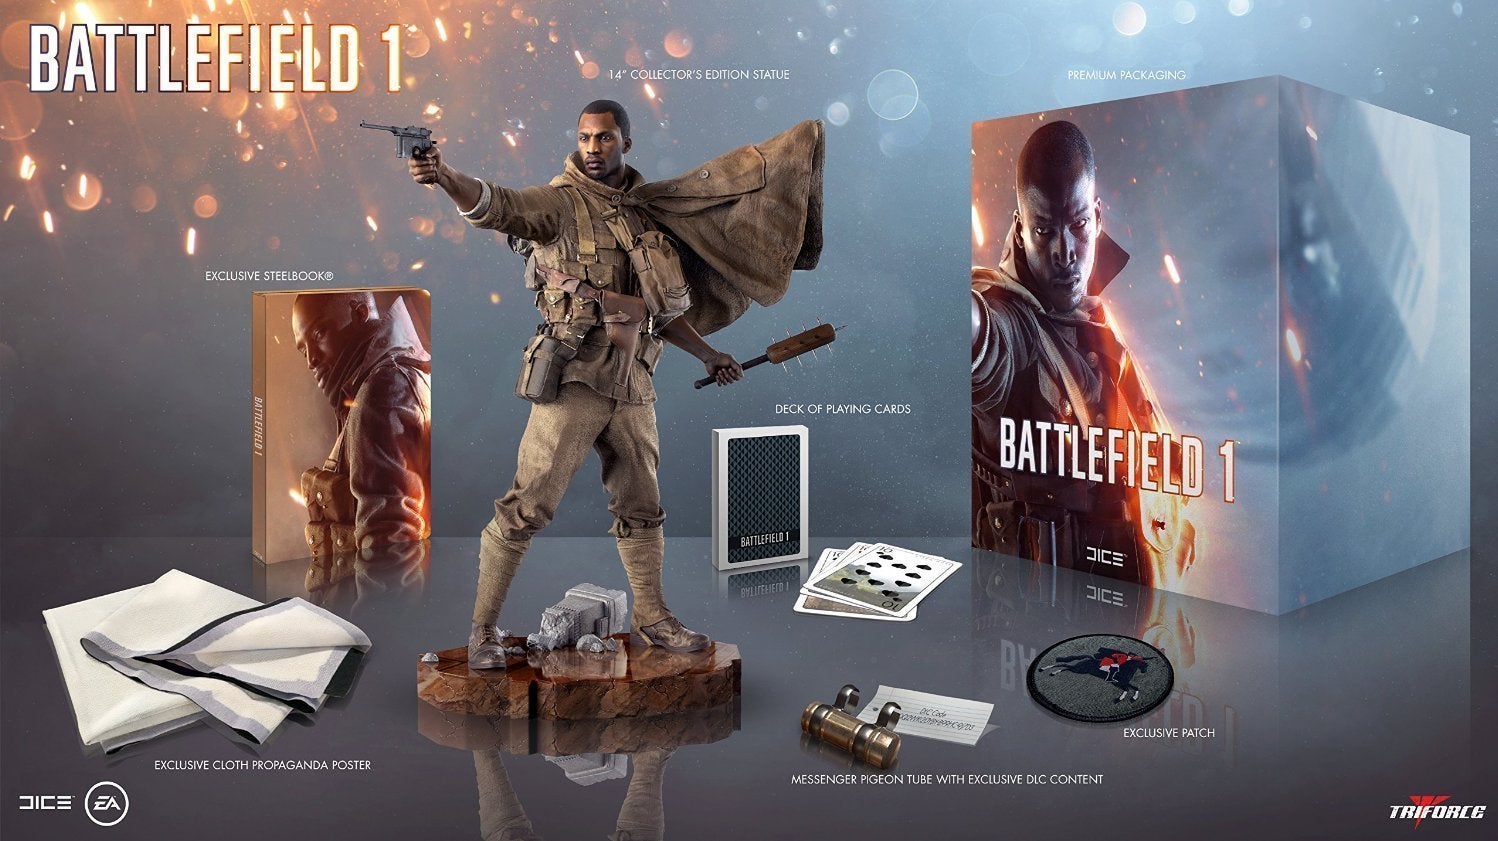 Image for Amazon's Battlefield 1 Collector's Edition comes with a statue, a steelbook, and no game